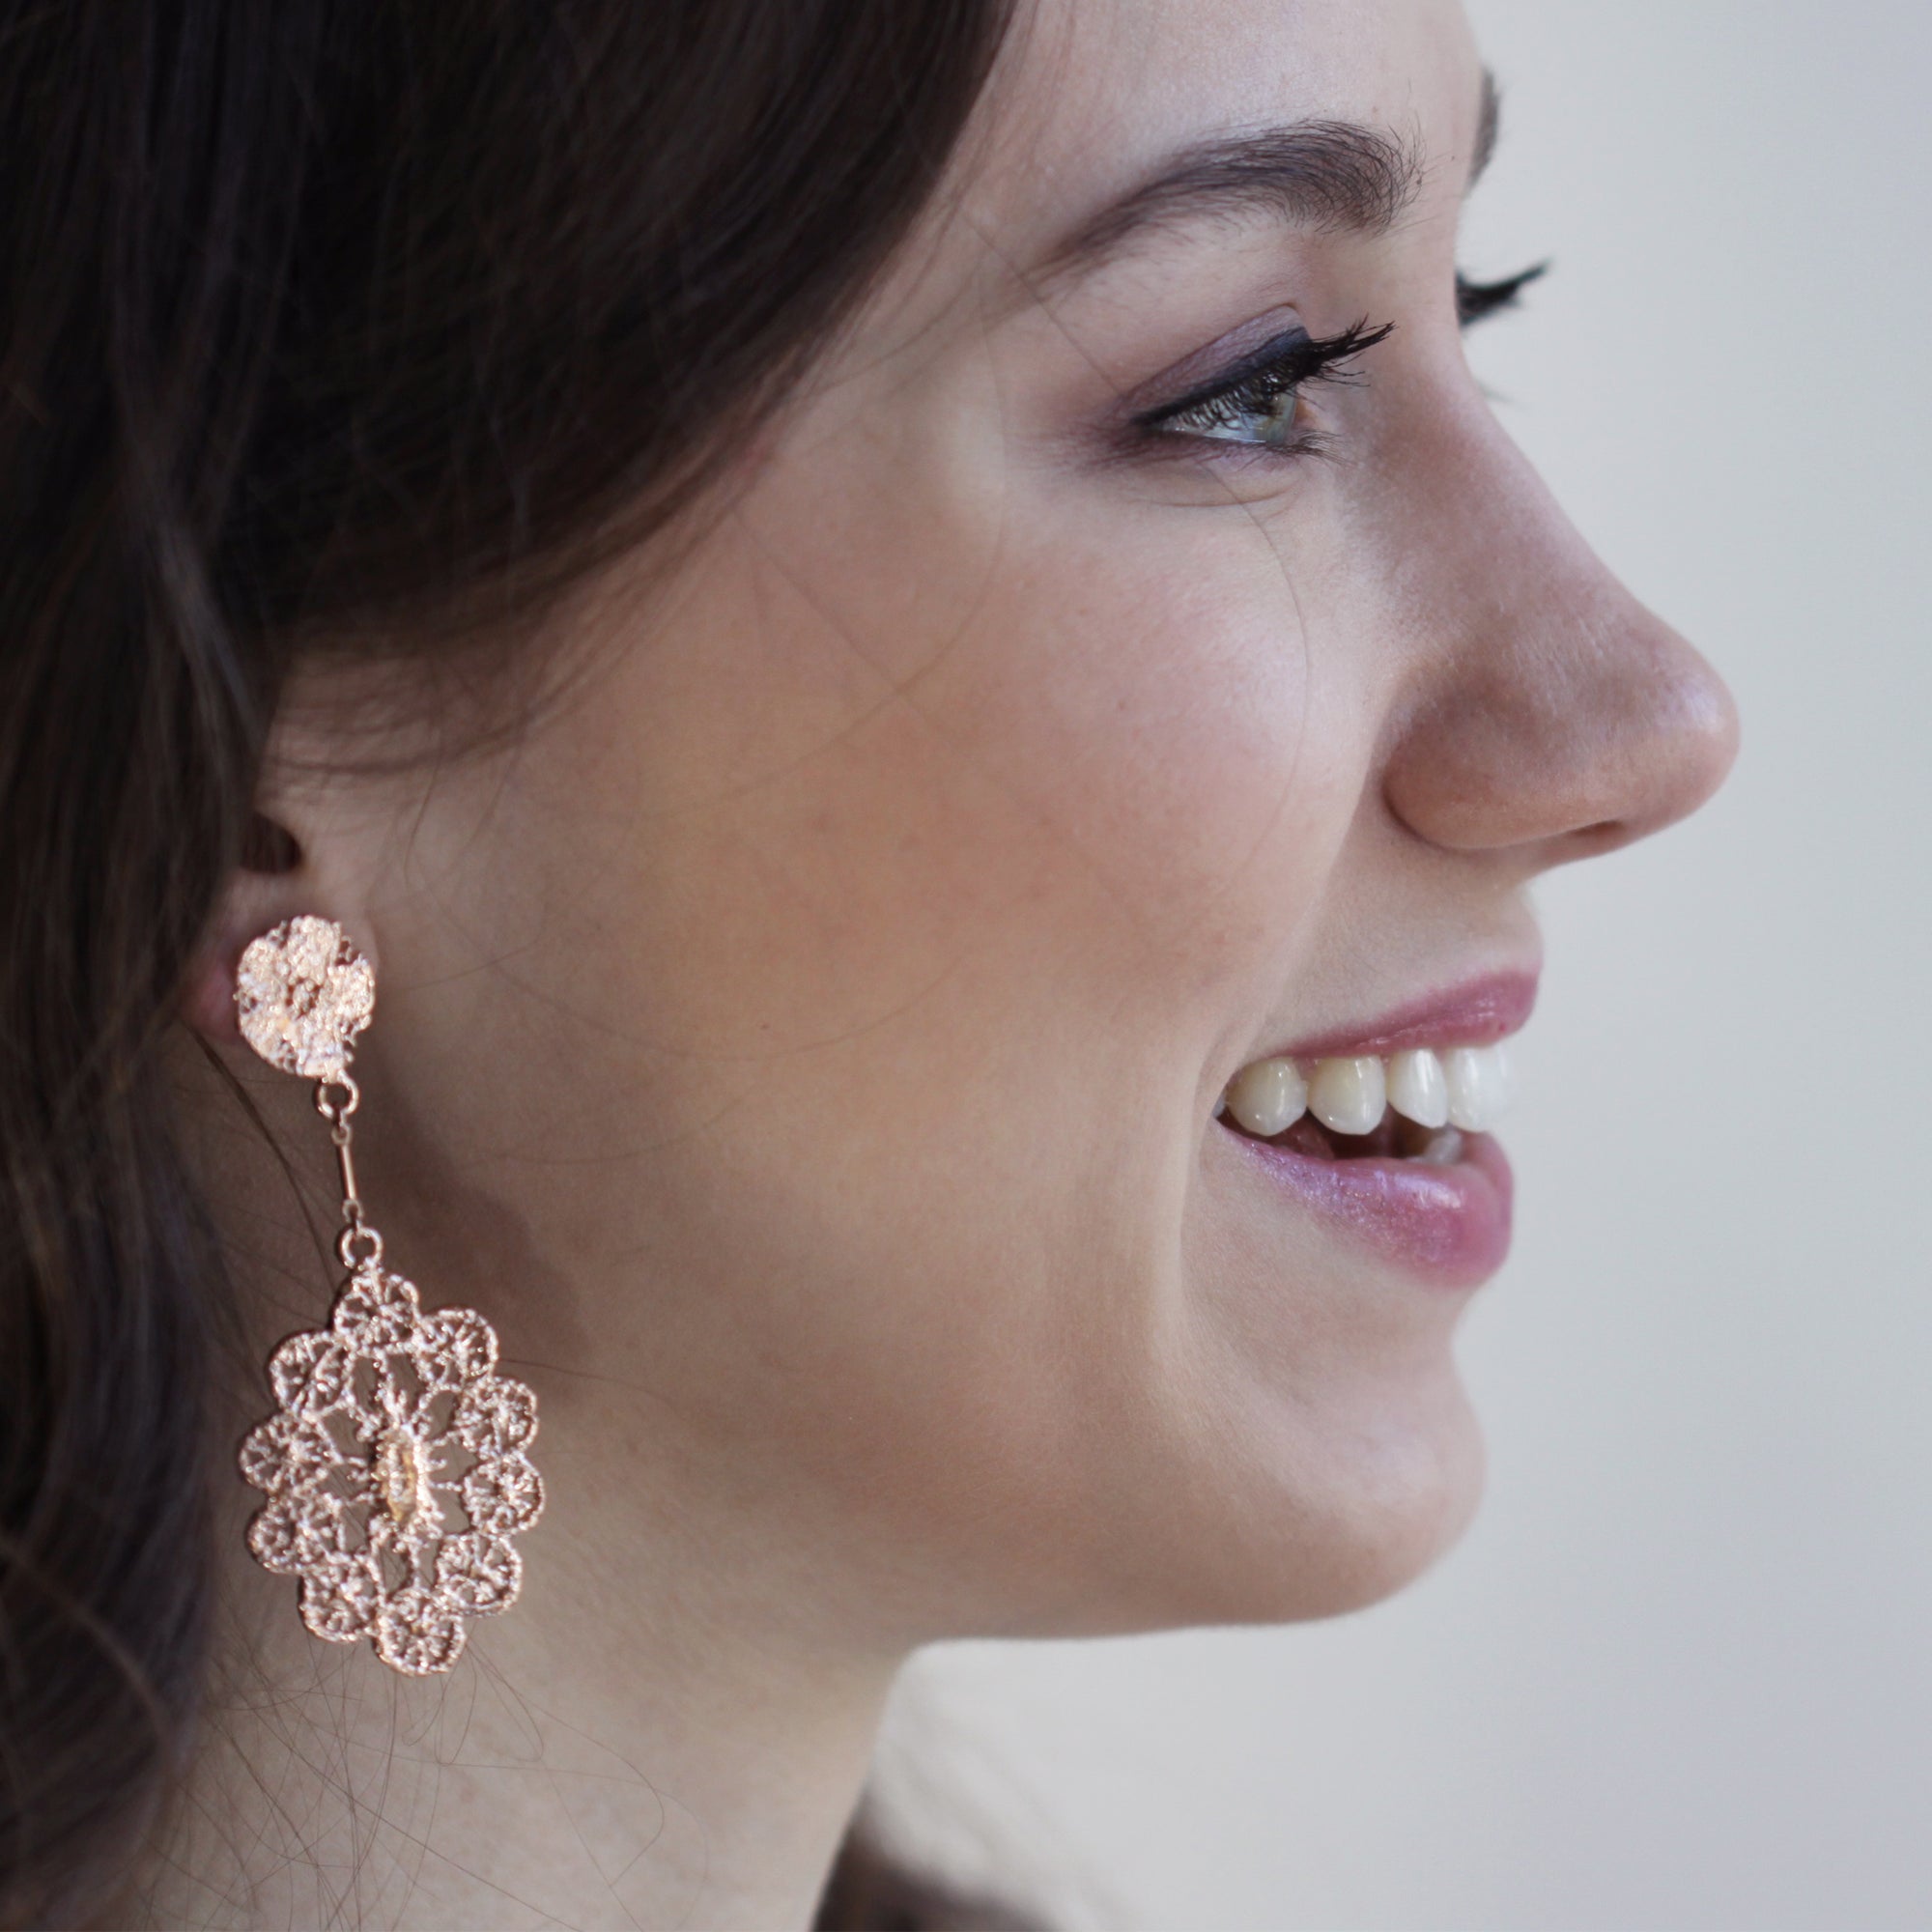 Unique lace drop earrings in rose gold. Perfect for weddings.